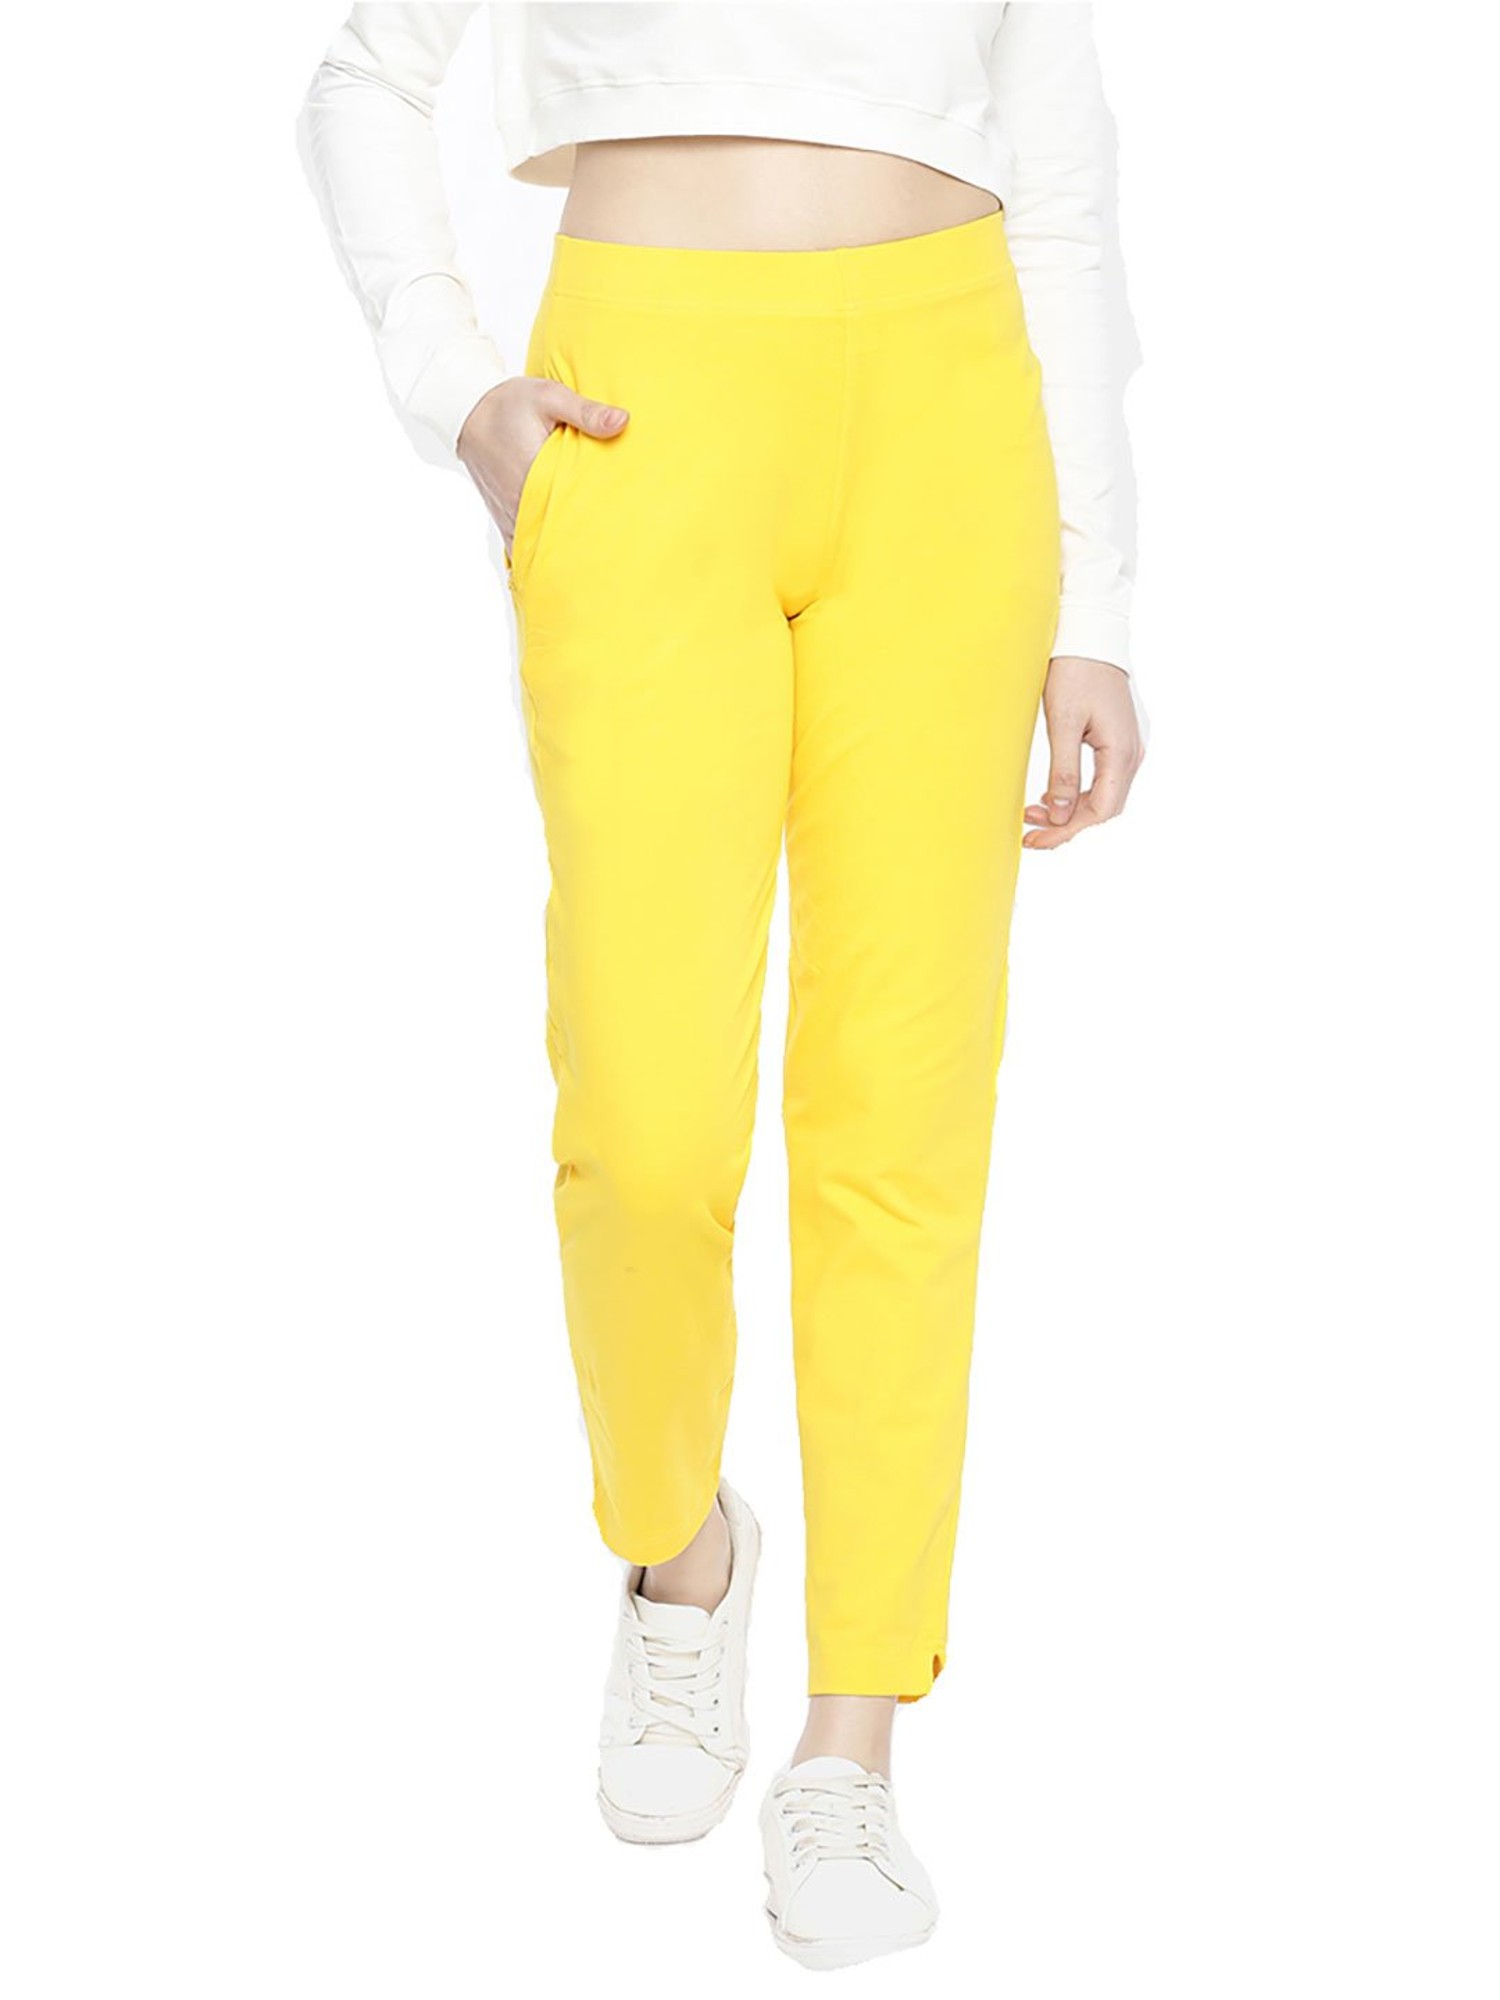 Duve Fashion Slim Fit Women Yellow Trousers  Buy Duve Fashion Slim Fit  Women Yellow Trousers Online at Best Prices in India  Flipkartcom